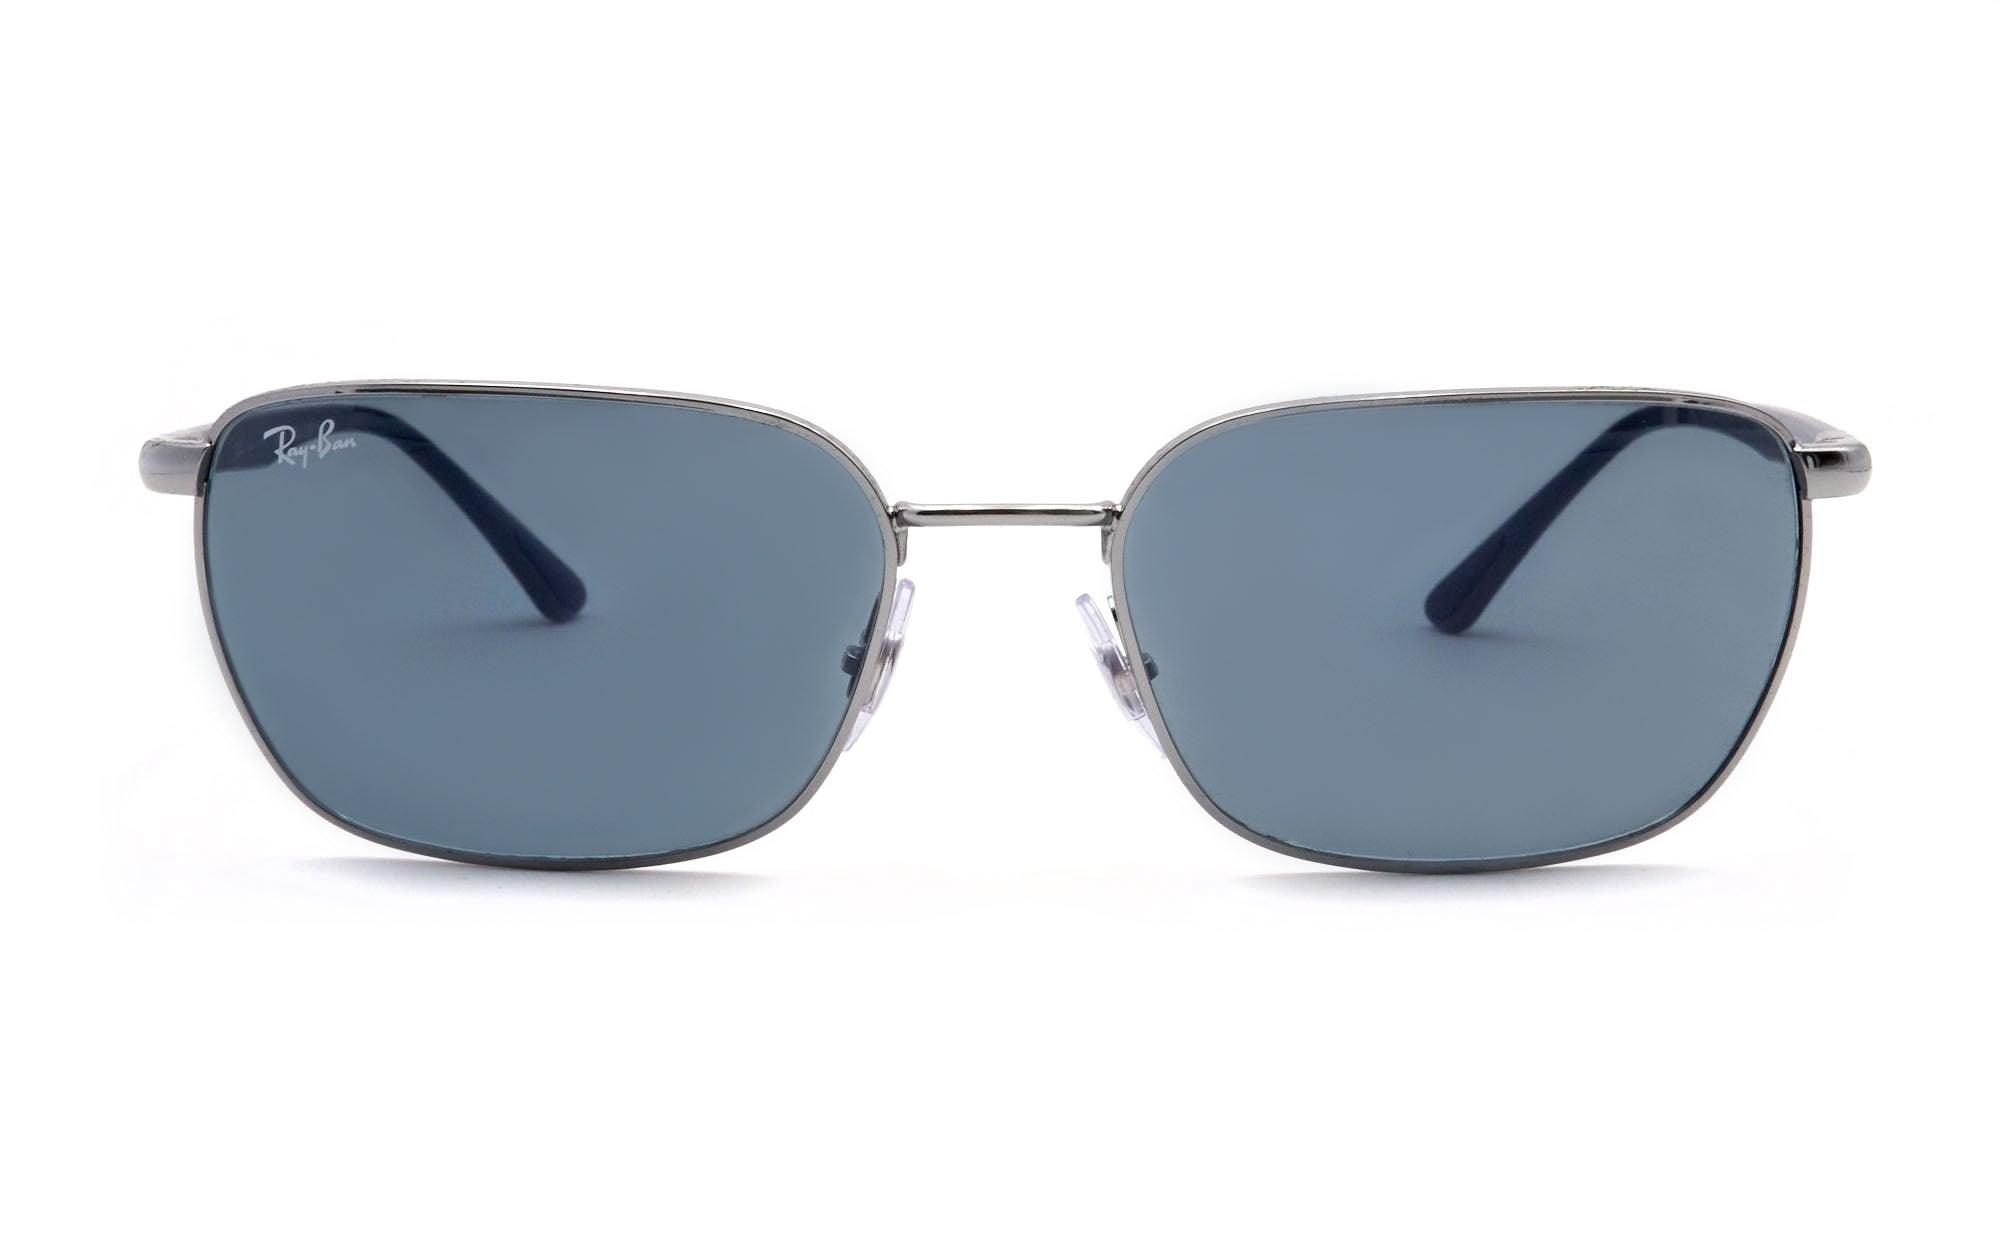 ray-ban 3684 004 r5 - Opticas Lookout